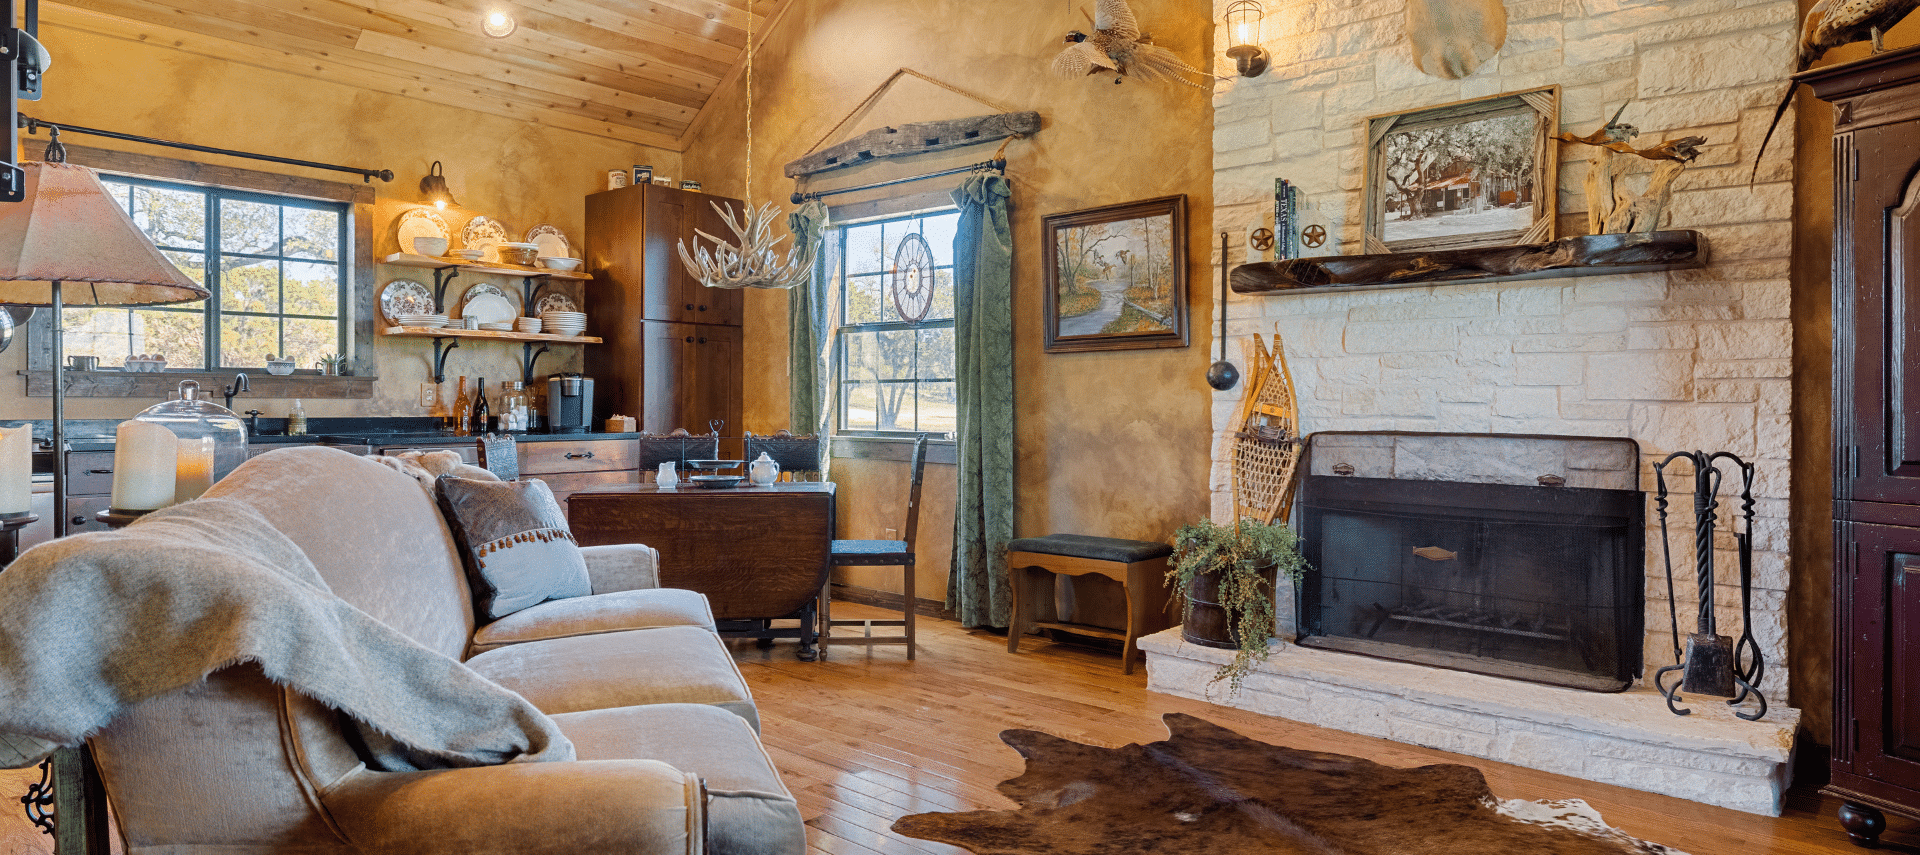 Image of interior shot of fireplace, couch and kitchen of the Winter's Mill Cabin accommodations at Inn at Sunset Mill Ranch in Wimberley Texas